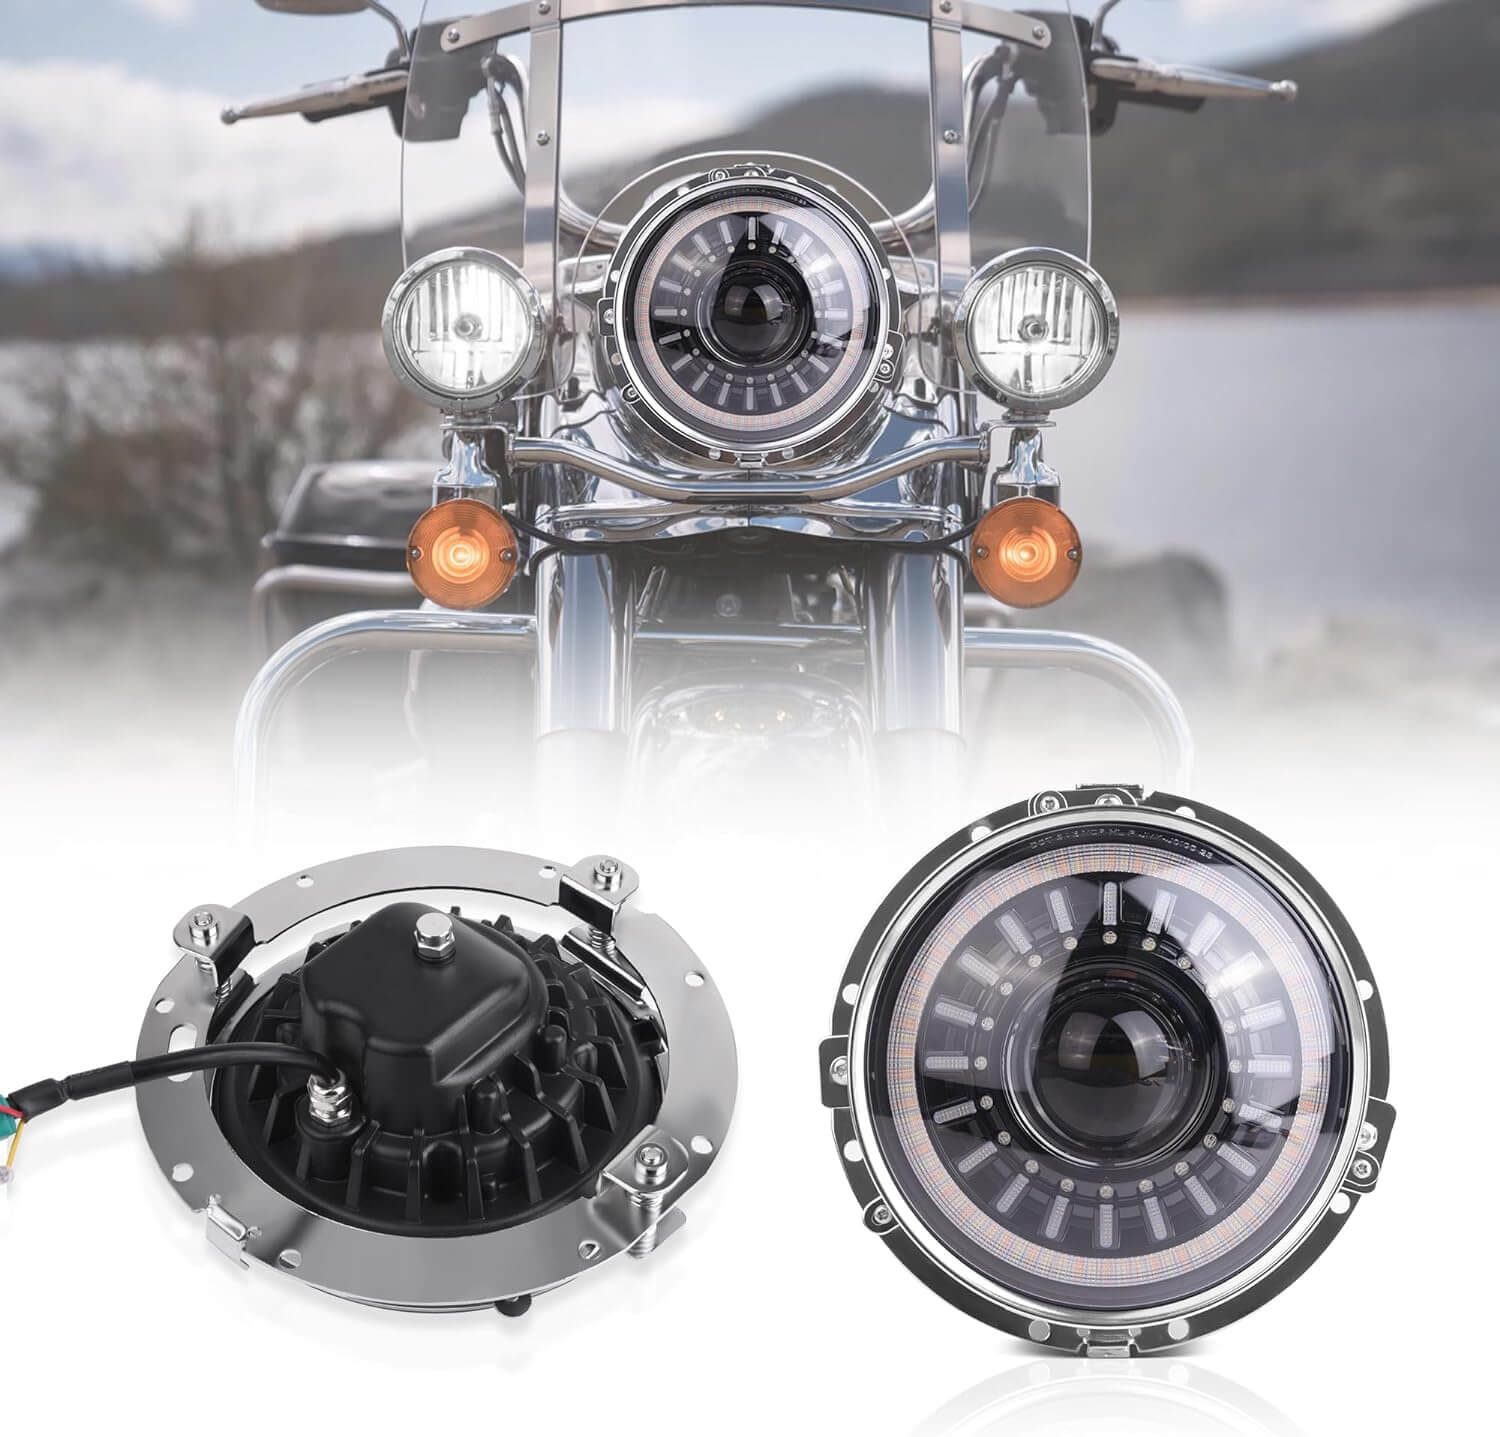 J1 Anti-glare 1000% Brighter 7″ Round Led Headlights with Start-up Gradient Welcome Halo, Motorcycle Headlights